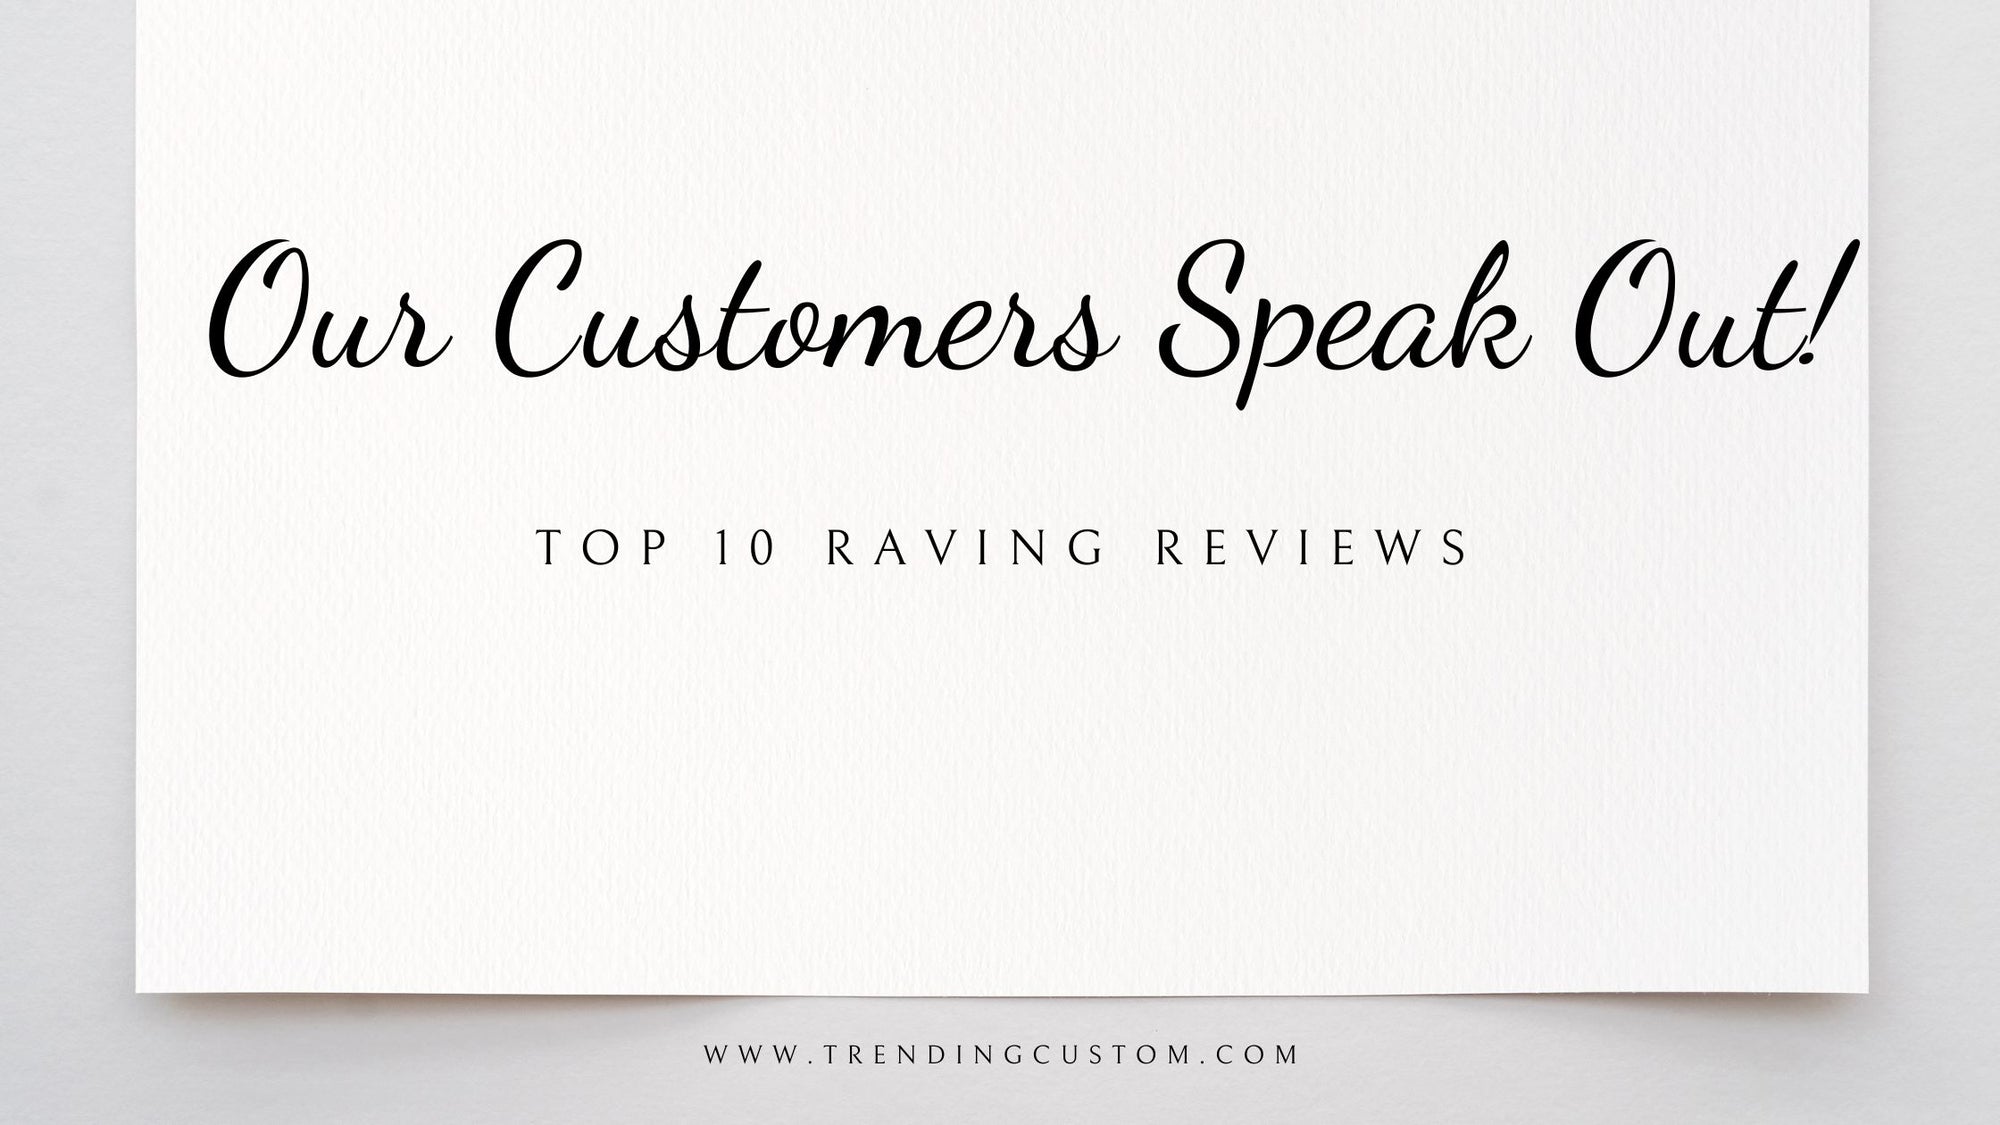 Top 10 Raving Reviews: Our Customers Speak Out! - April 7th